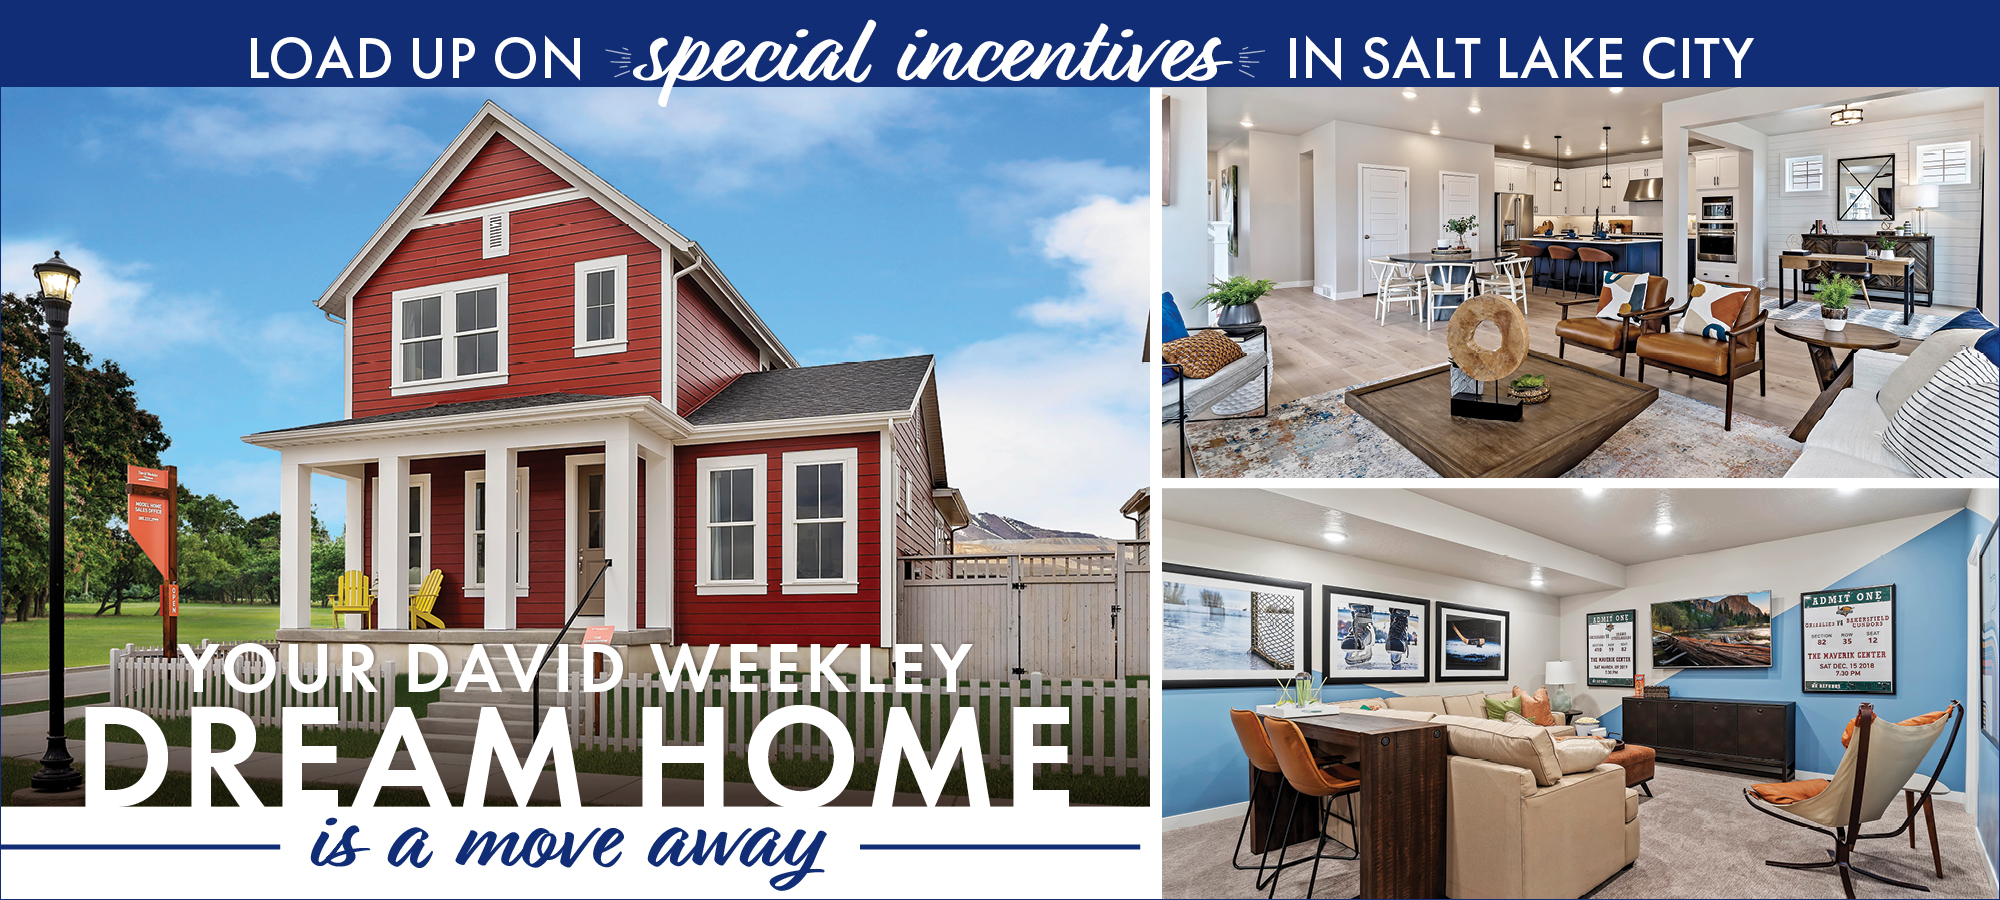 Your David Weekley Dream Home is a Move Away in Salt Lake City